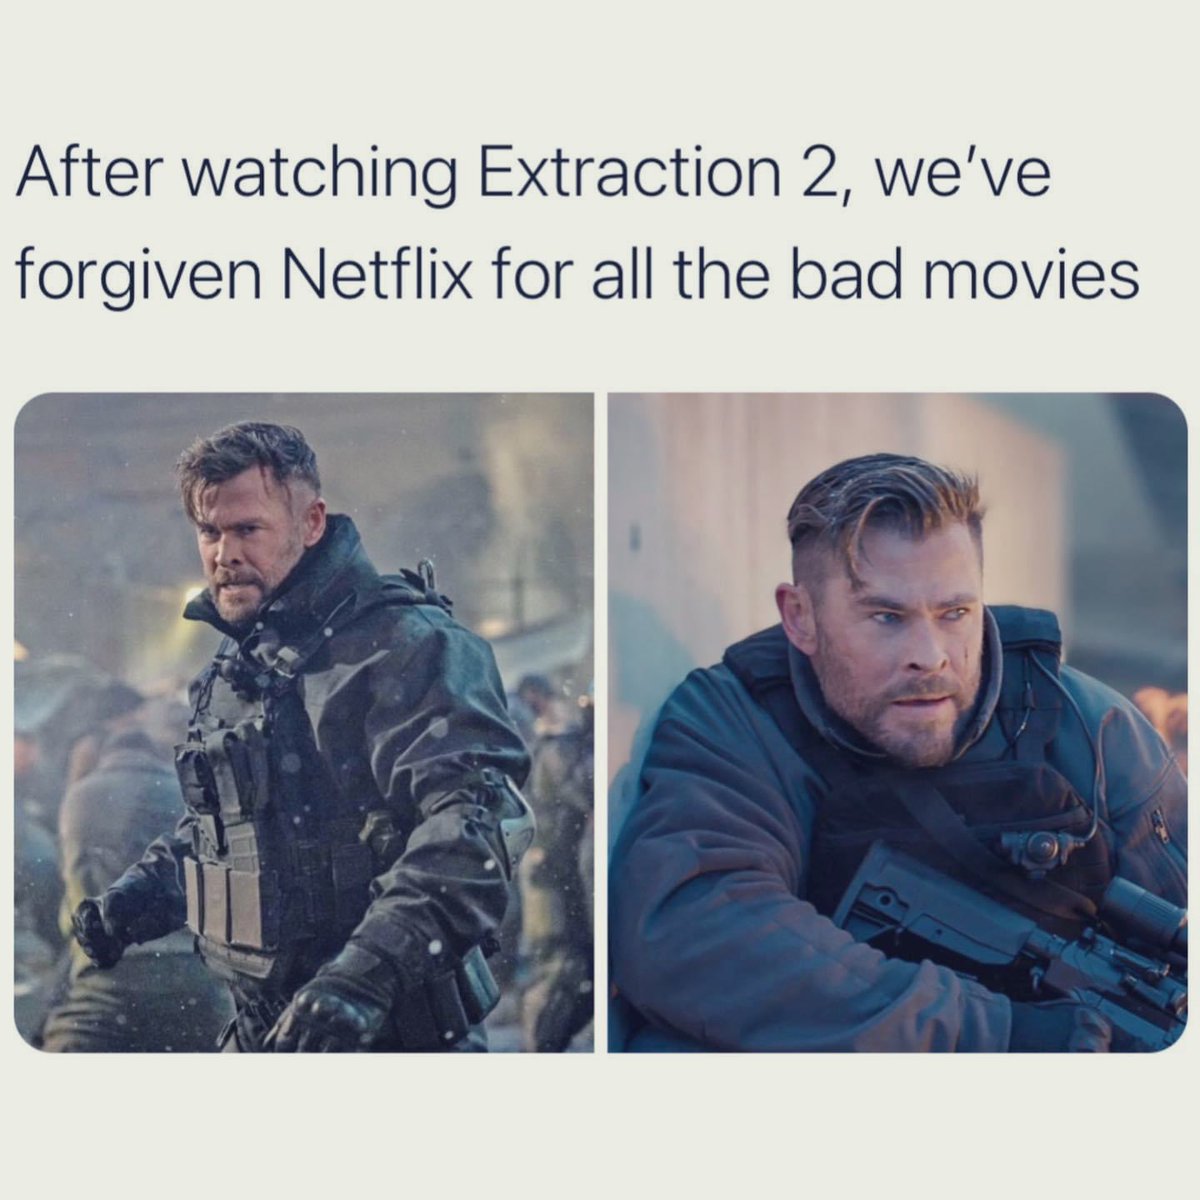 The issue comes after watching this there is nothing else in Netflix that will taste the same.

#Extraction2 #Extraction2Netflix